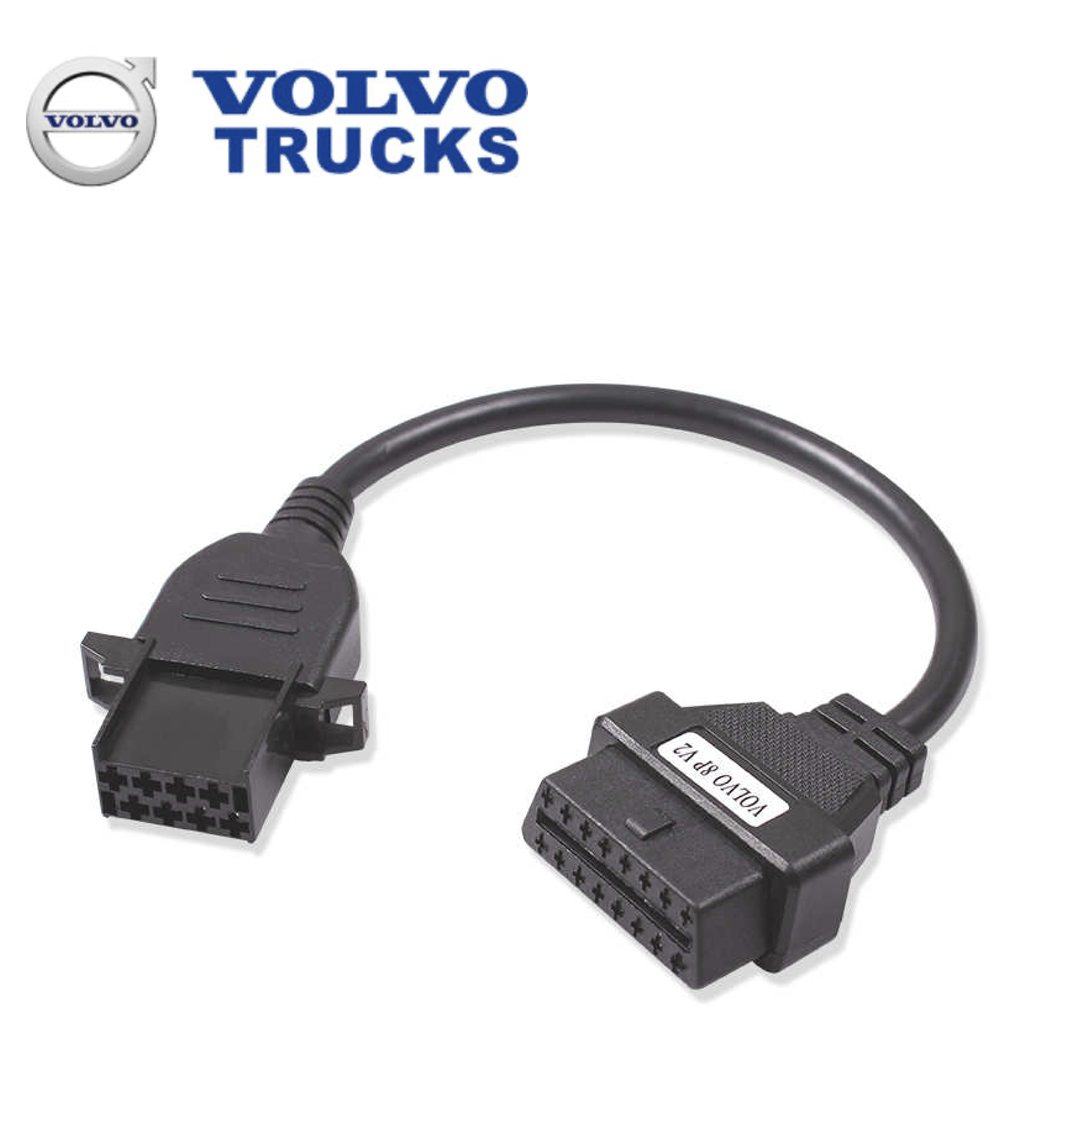 adaptateur-volvo-8-broches-compatible-valises-diagnostic-icarsoft-france